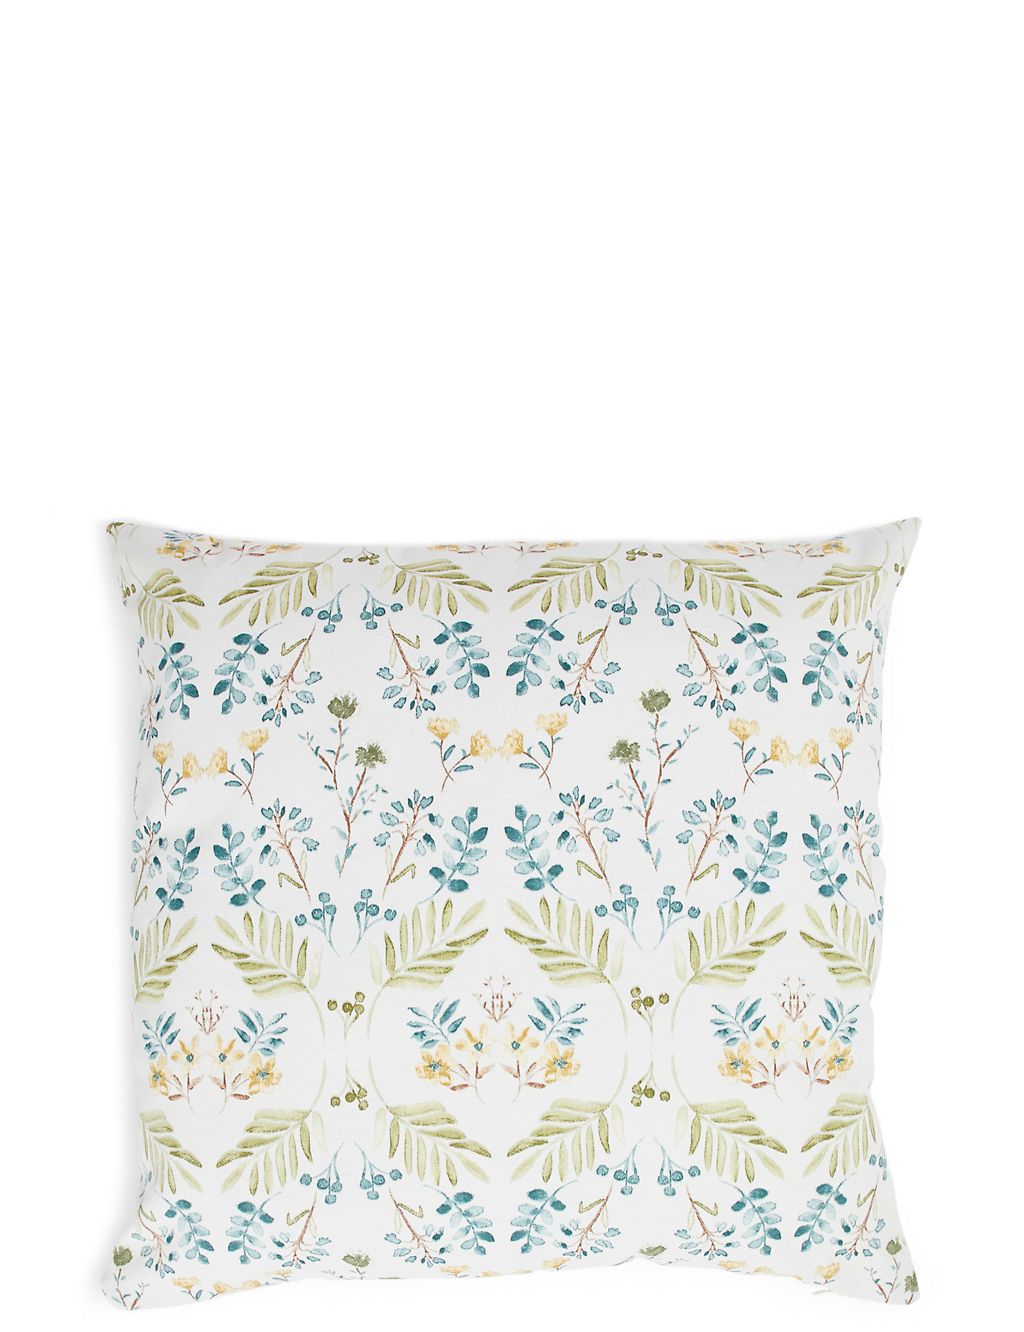 Painterly Floral Print Cushion 1 of 1